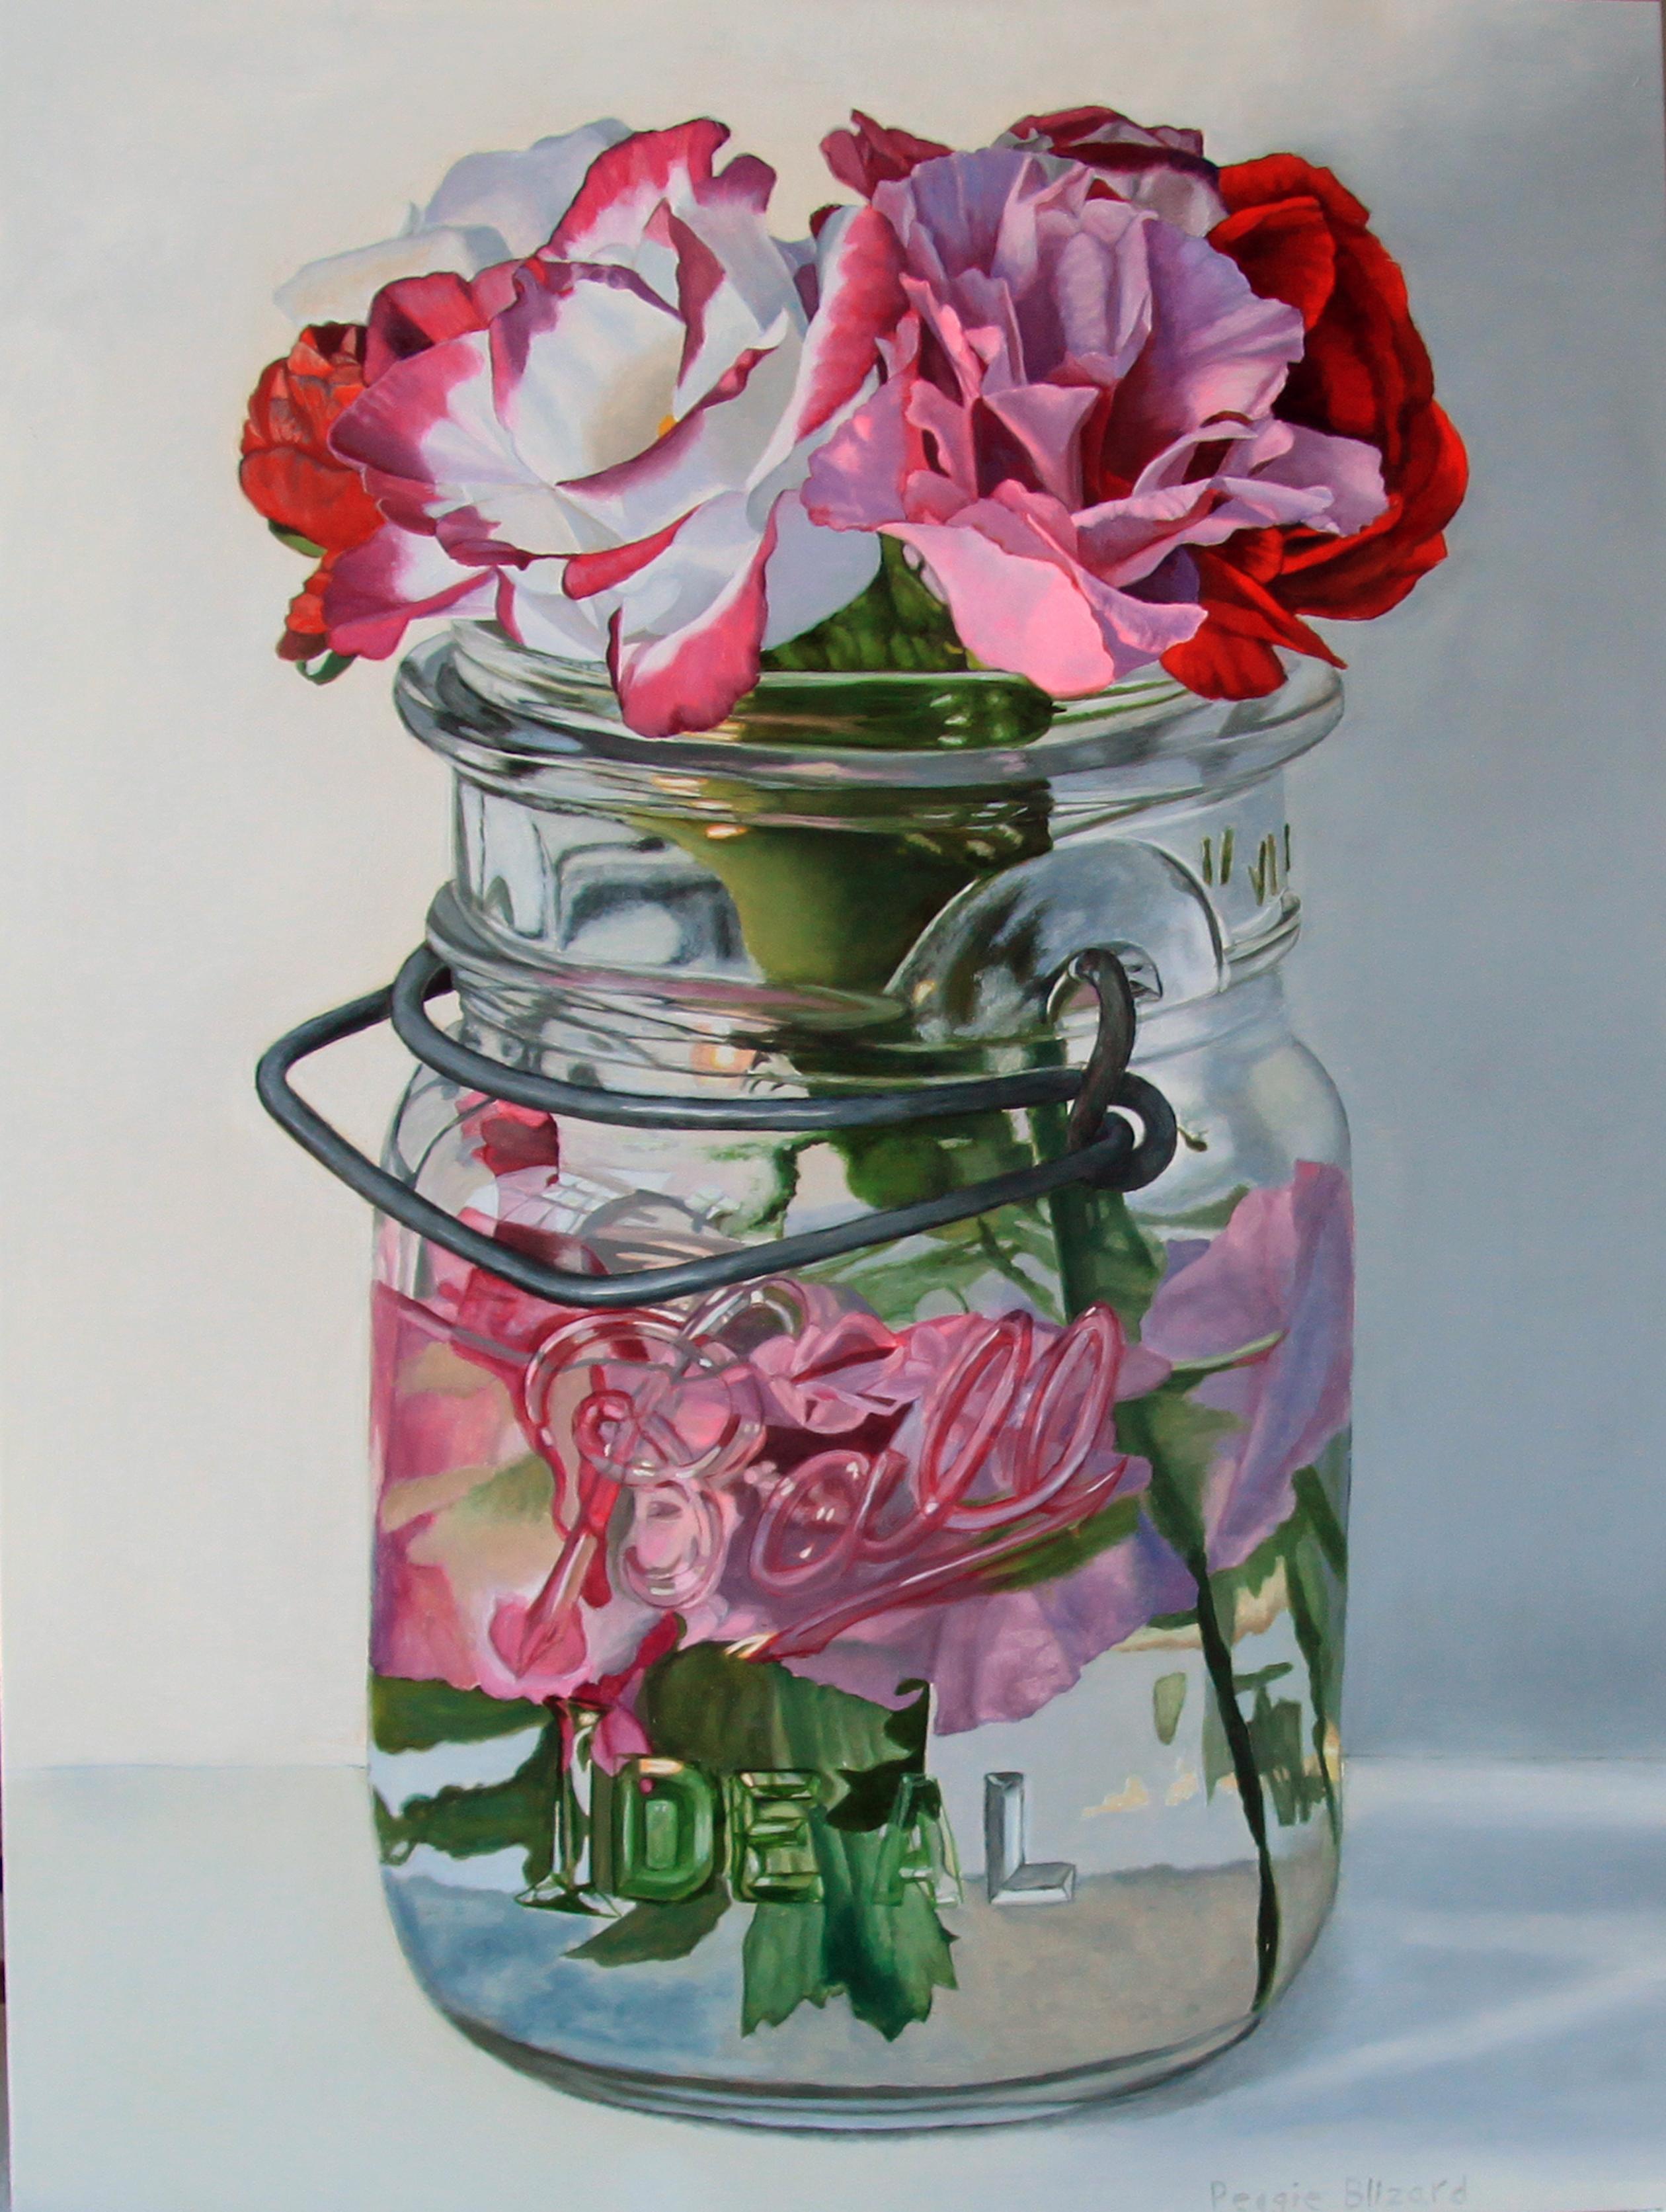 Lisianthus in a Clear Jar - Painting by Peggie Blizard